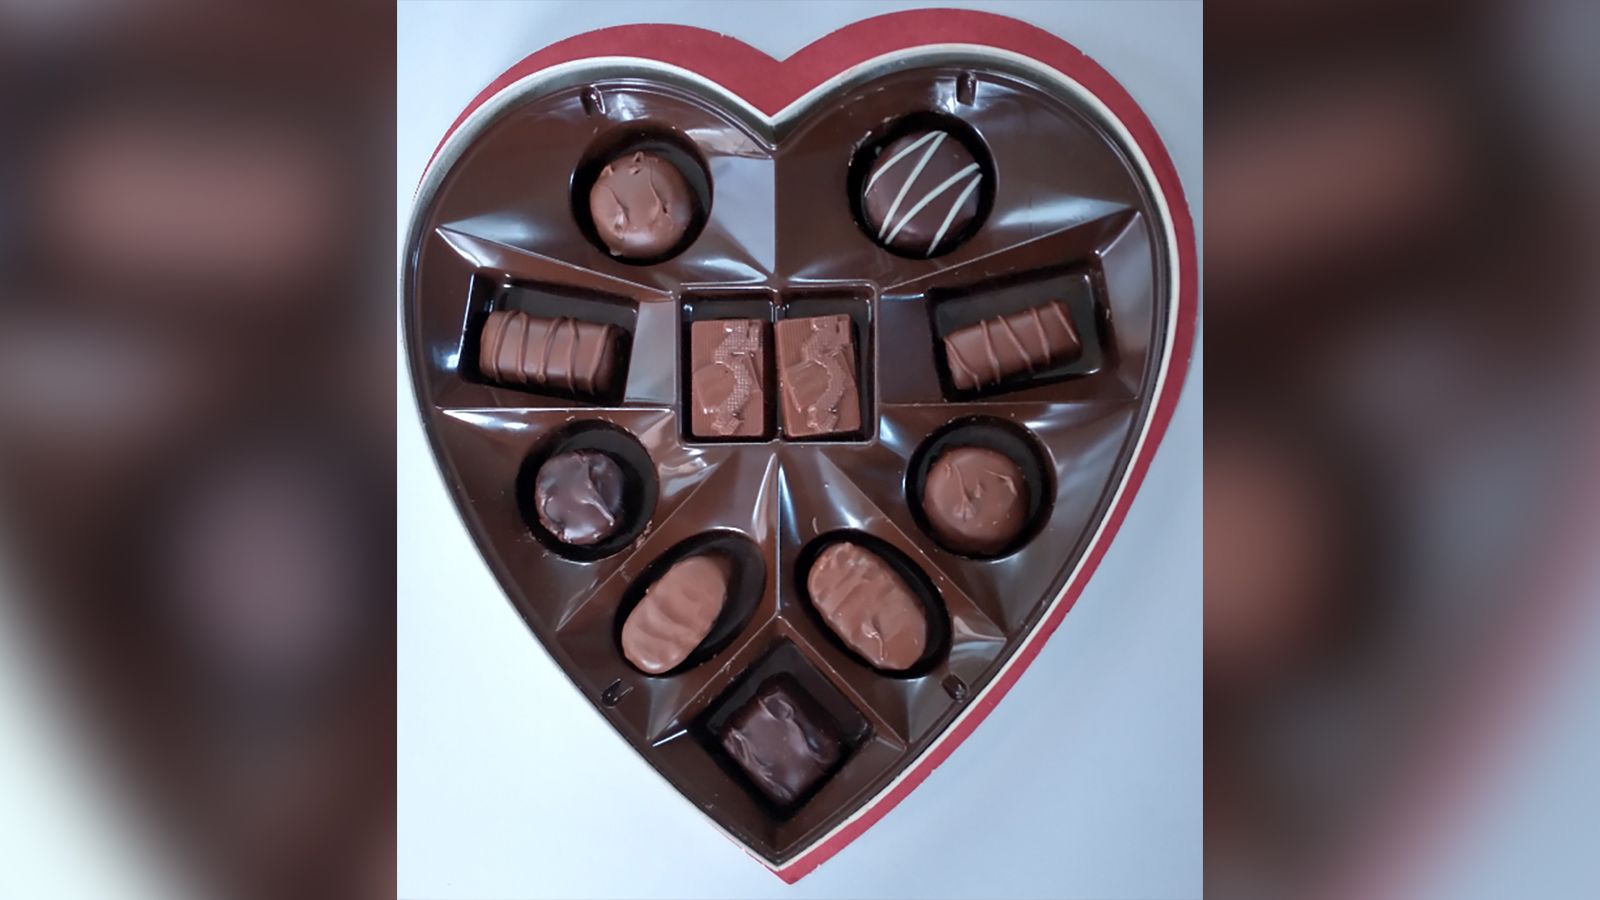 Heart-shaped boxes held more than candy